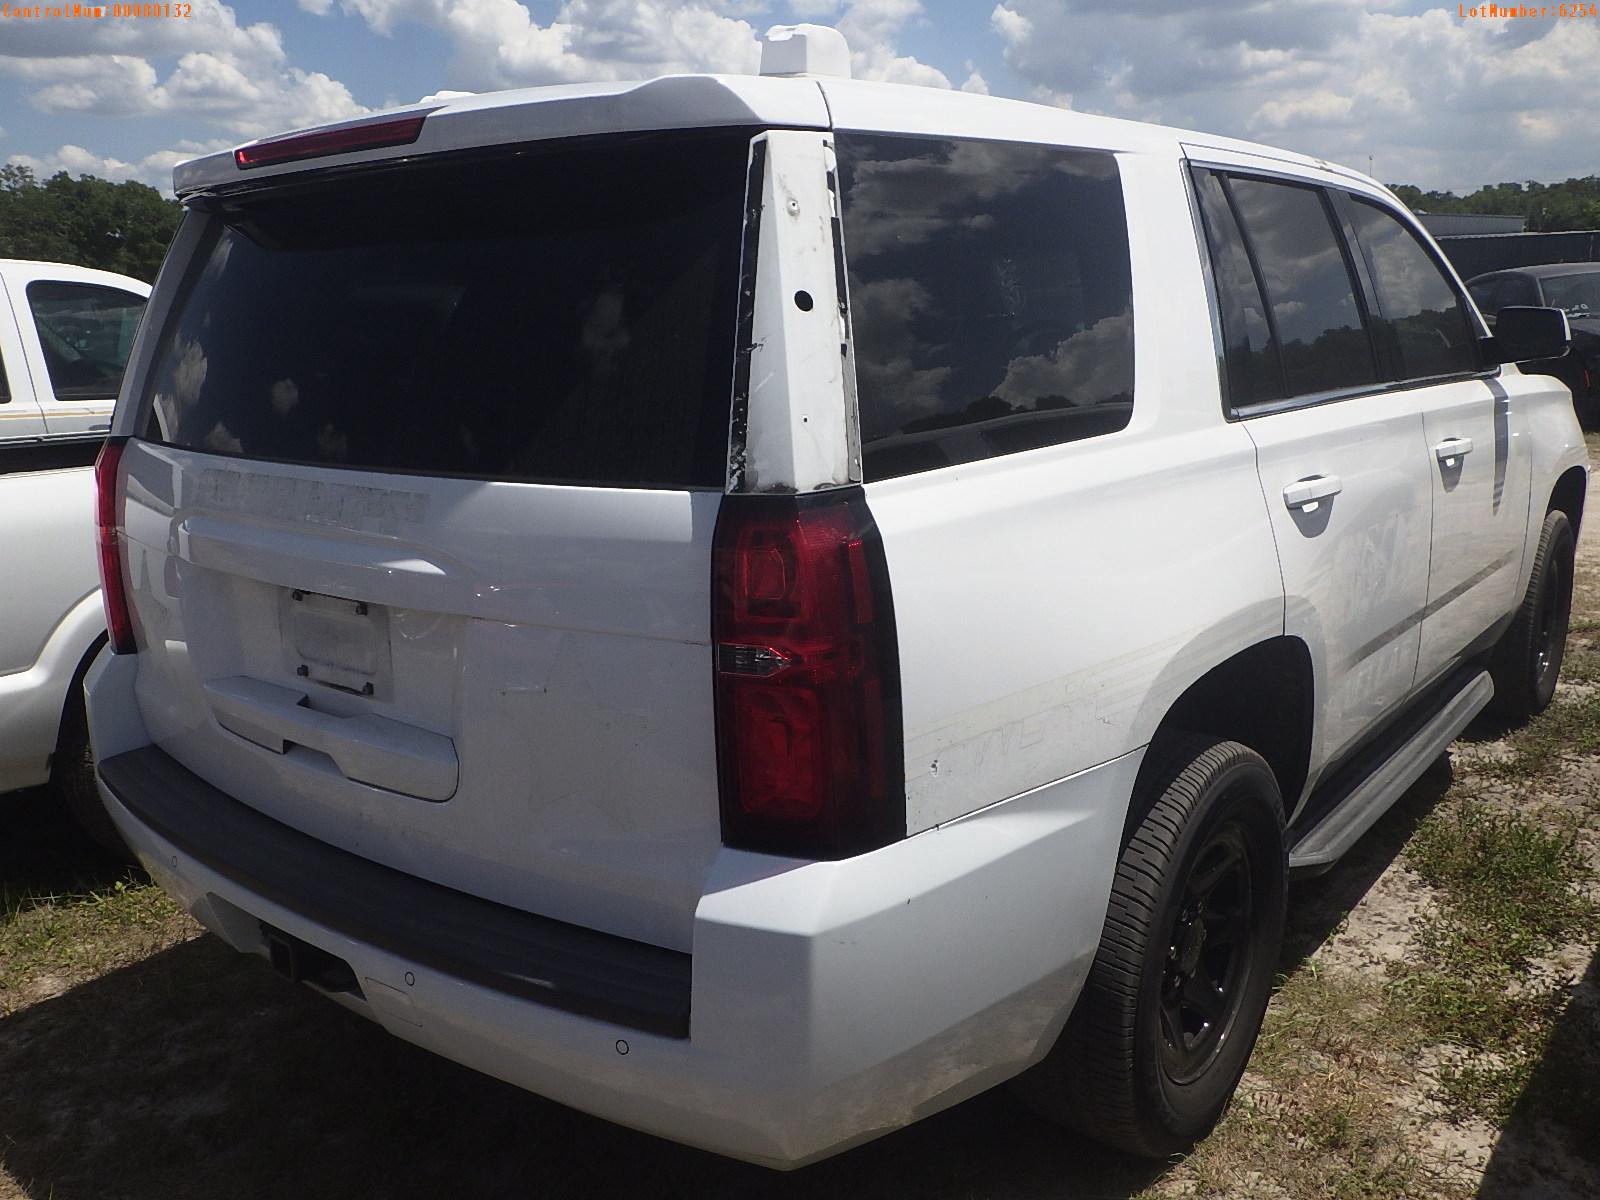 5-06254 (Cars-SUV 4D)  Seller: Gov-Pinellas County Sheriffs Ofc 2015 CHEV TAHOE